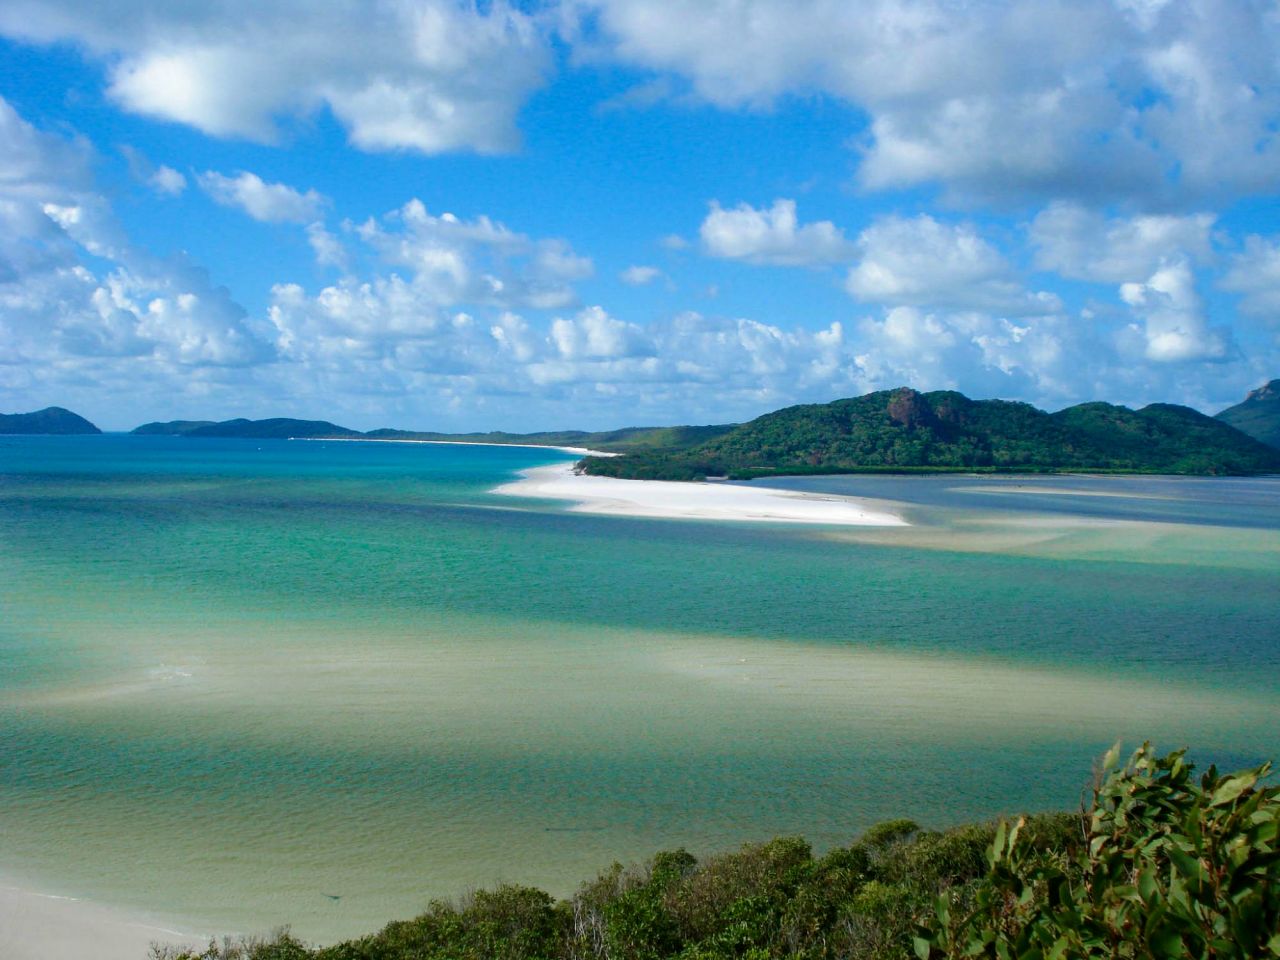 Whitehaven Beach on Australia's Whitsunday Island dropped from No. 3 last year to this year's No. 5 spot.